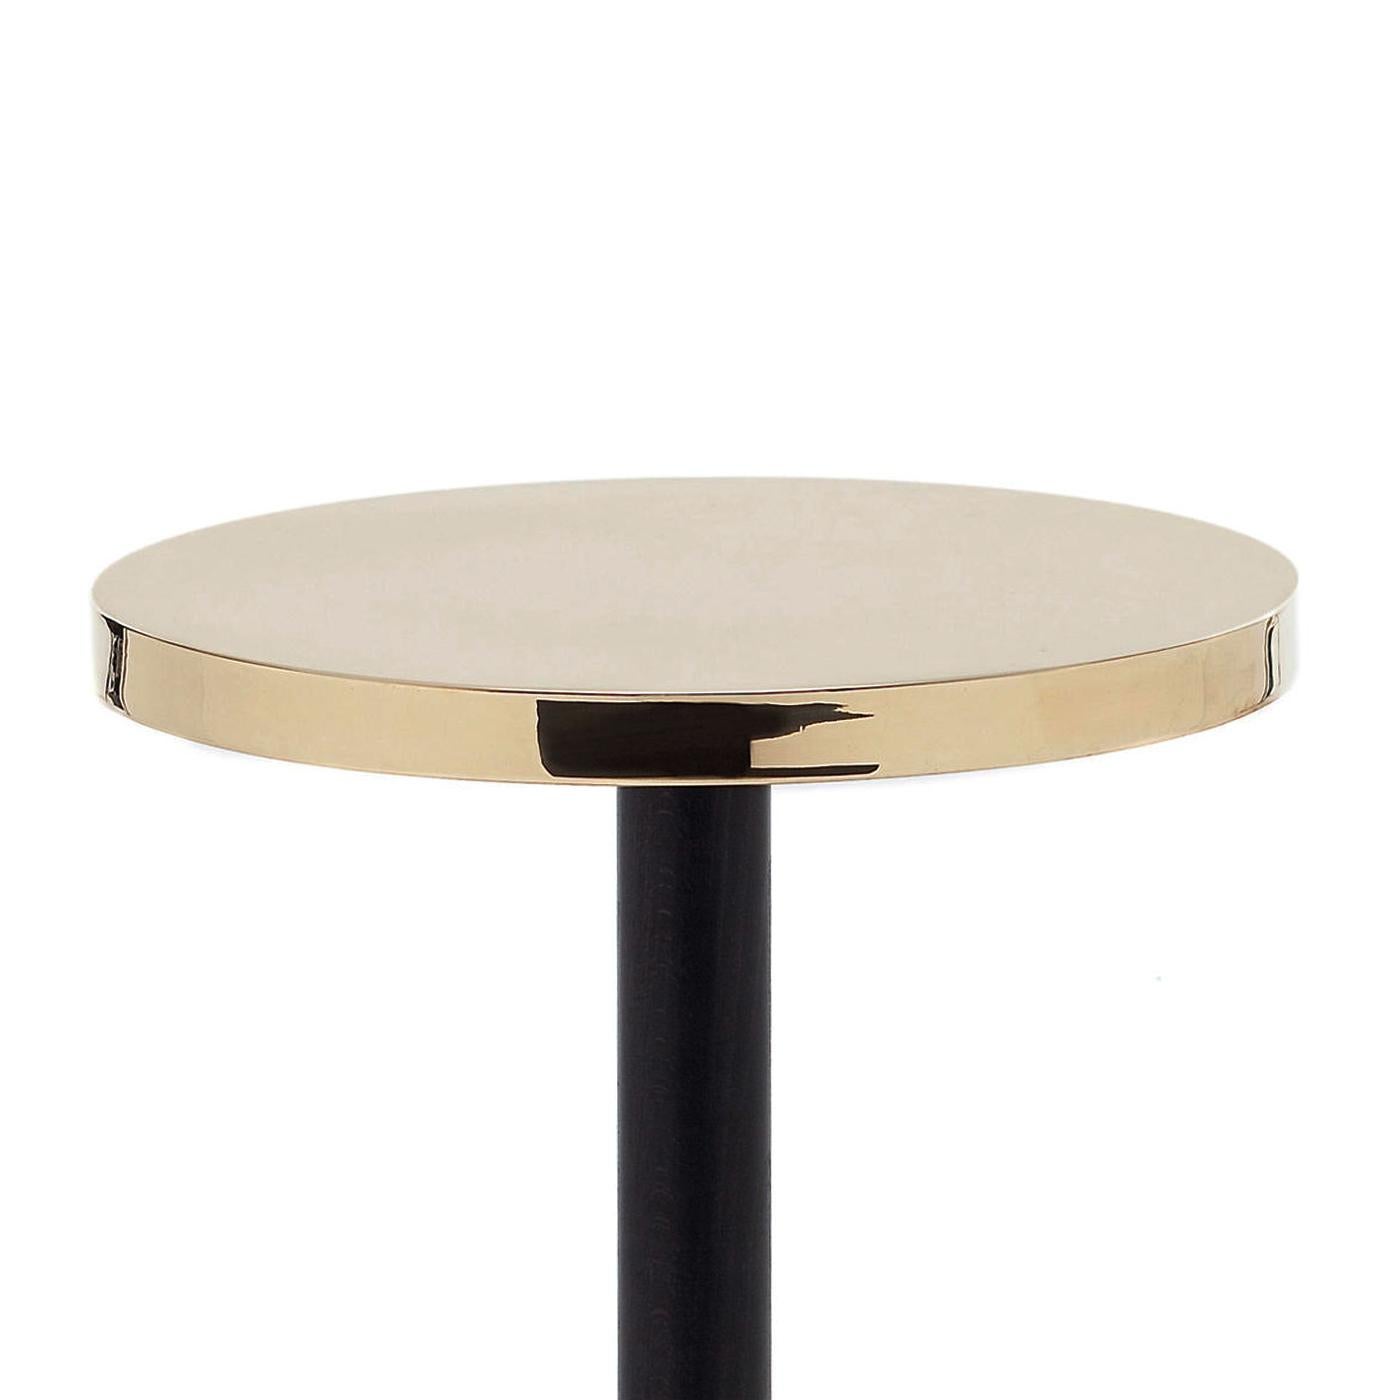 Side table shiny with casted iron base in black finish,
with wooden column base in black finish and with polished
glossy brass top.